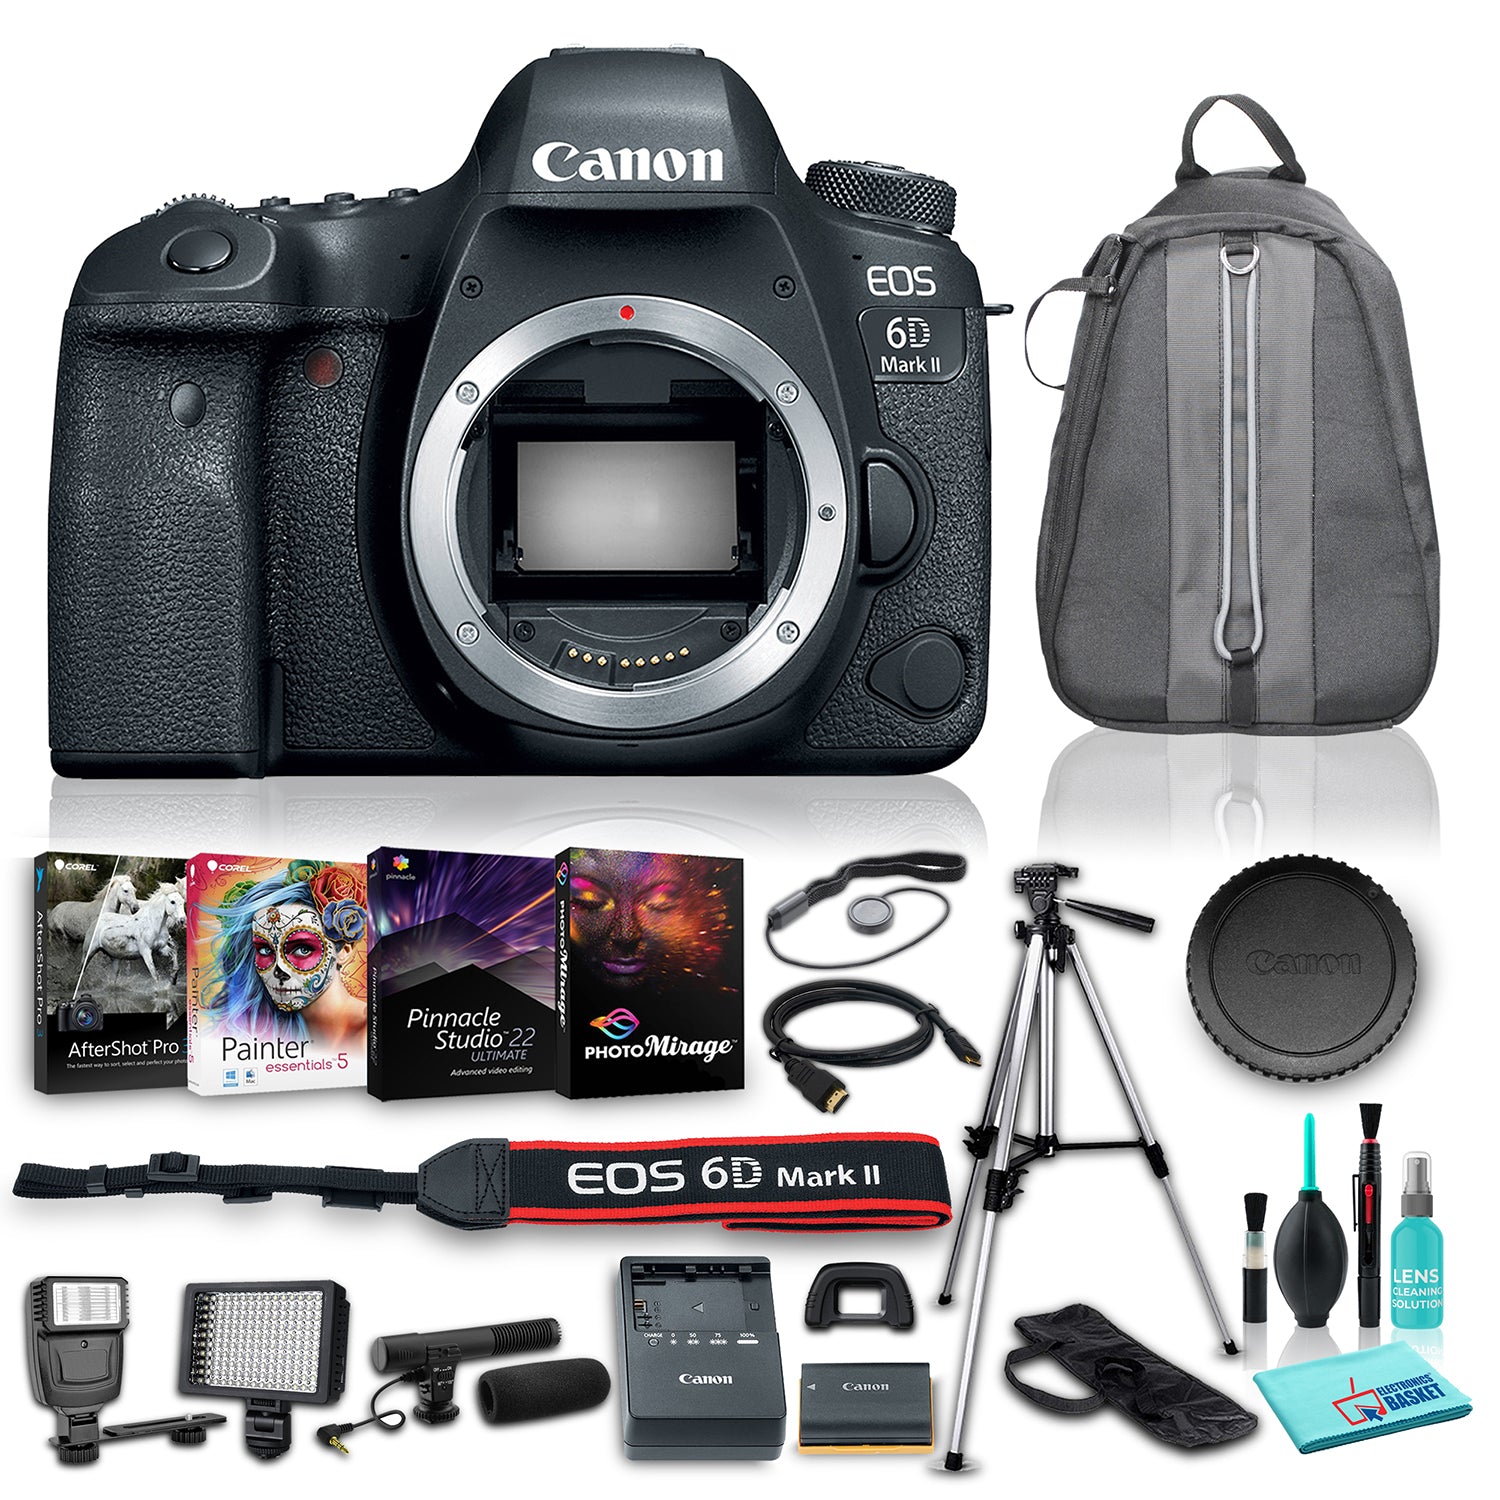 Canon EOS 6D Mark II DSLR Camera (Body Only), 45-Point All-Cross Type AF System, DIGIC 7 Image Processor w/ 10 Piece Accessories